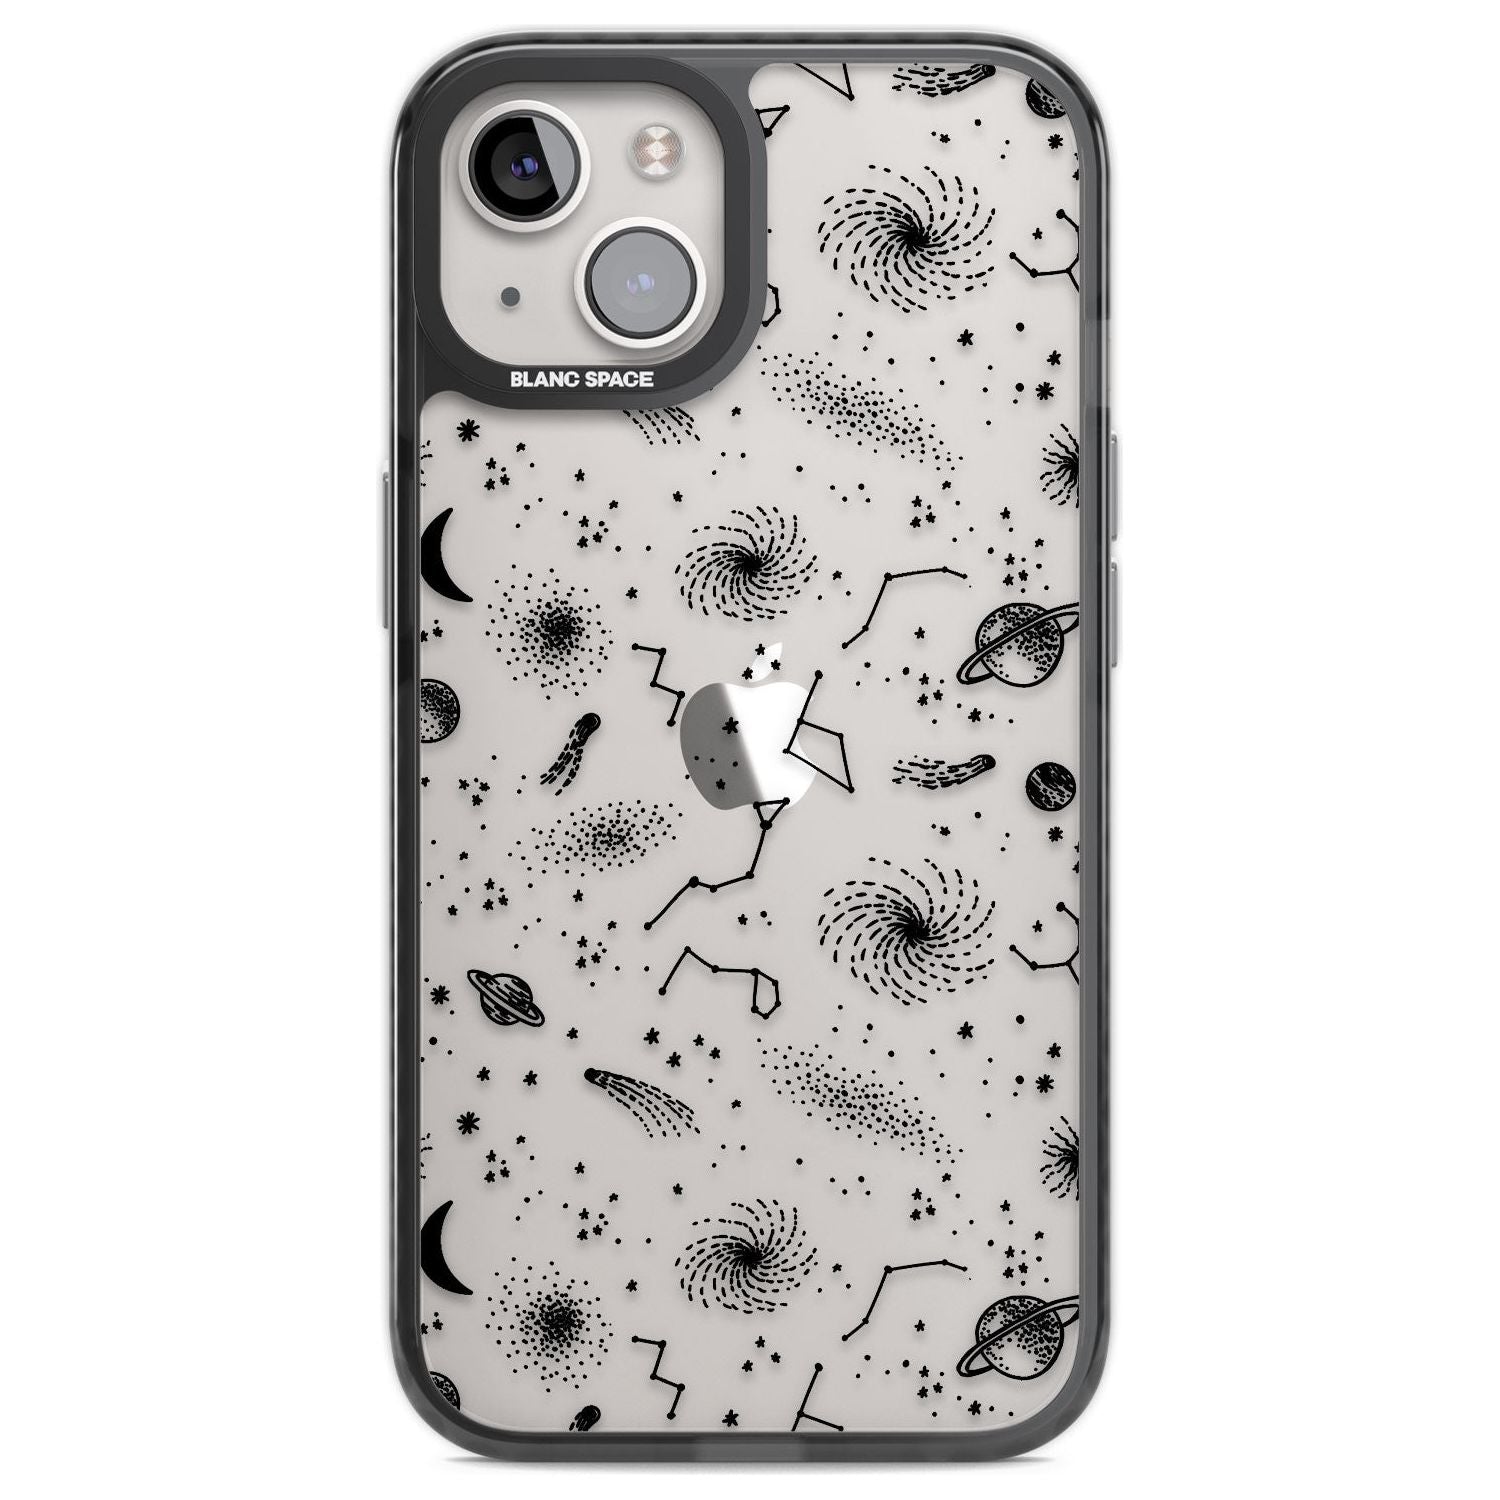 Mixed Galaxy Pattern Phone Case iPhone 12 / Black Impact Case,iPhone 13 / Black Impact Case,iPhone 12 Pro / Black Impact Case,iPhone 14 / Black Impact Case,iPhone 15 Plus / Black Impact Case,iPhone 15 / Black Impact Case Blanc Space